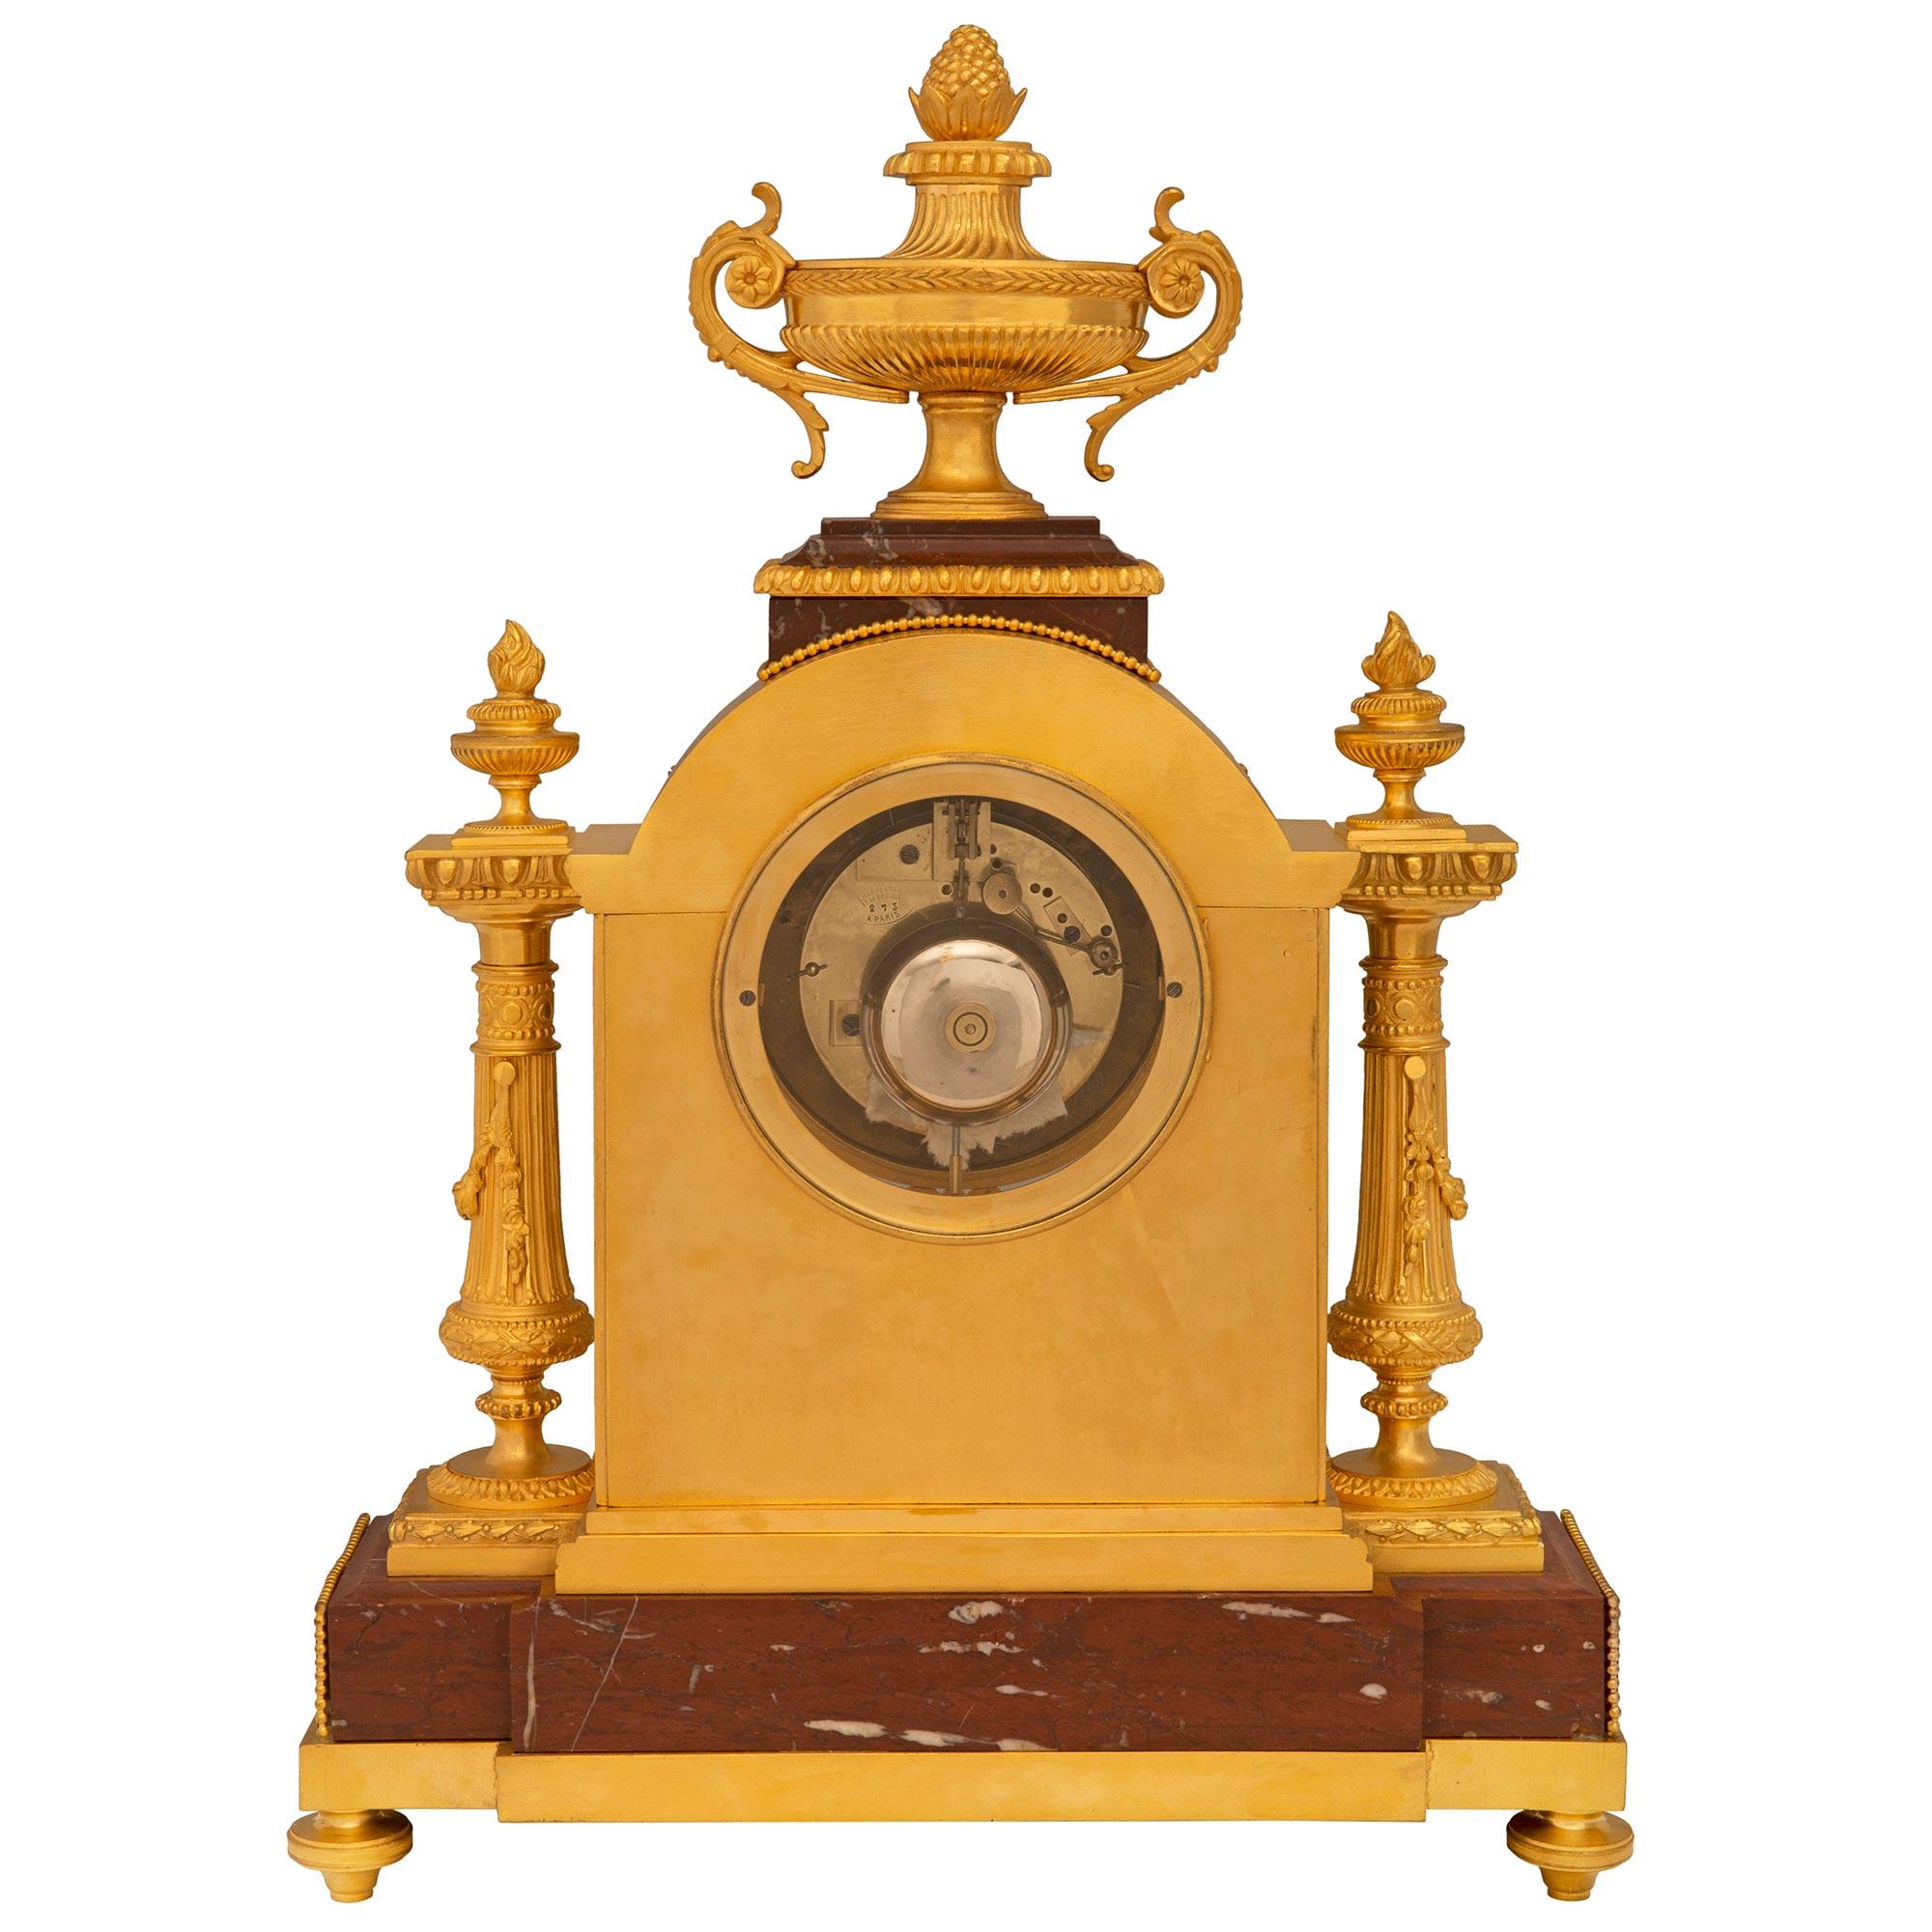 Ormolu A French 19th century Louis XVI st. clock signed Le Merle Charpentier Bronzier  For Sale